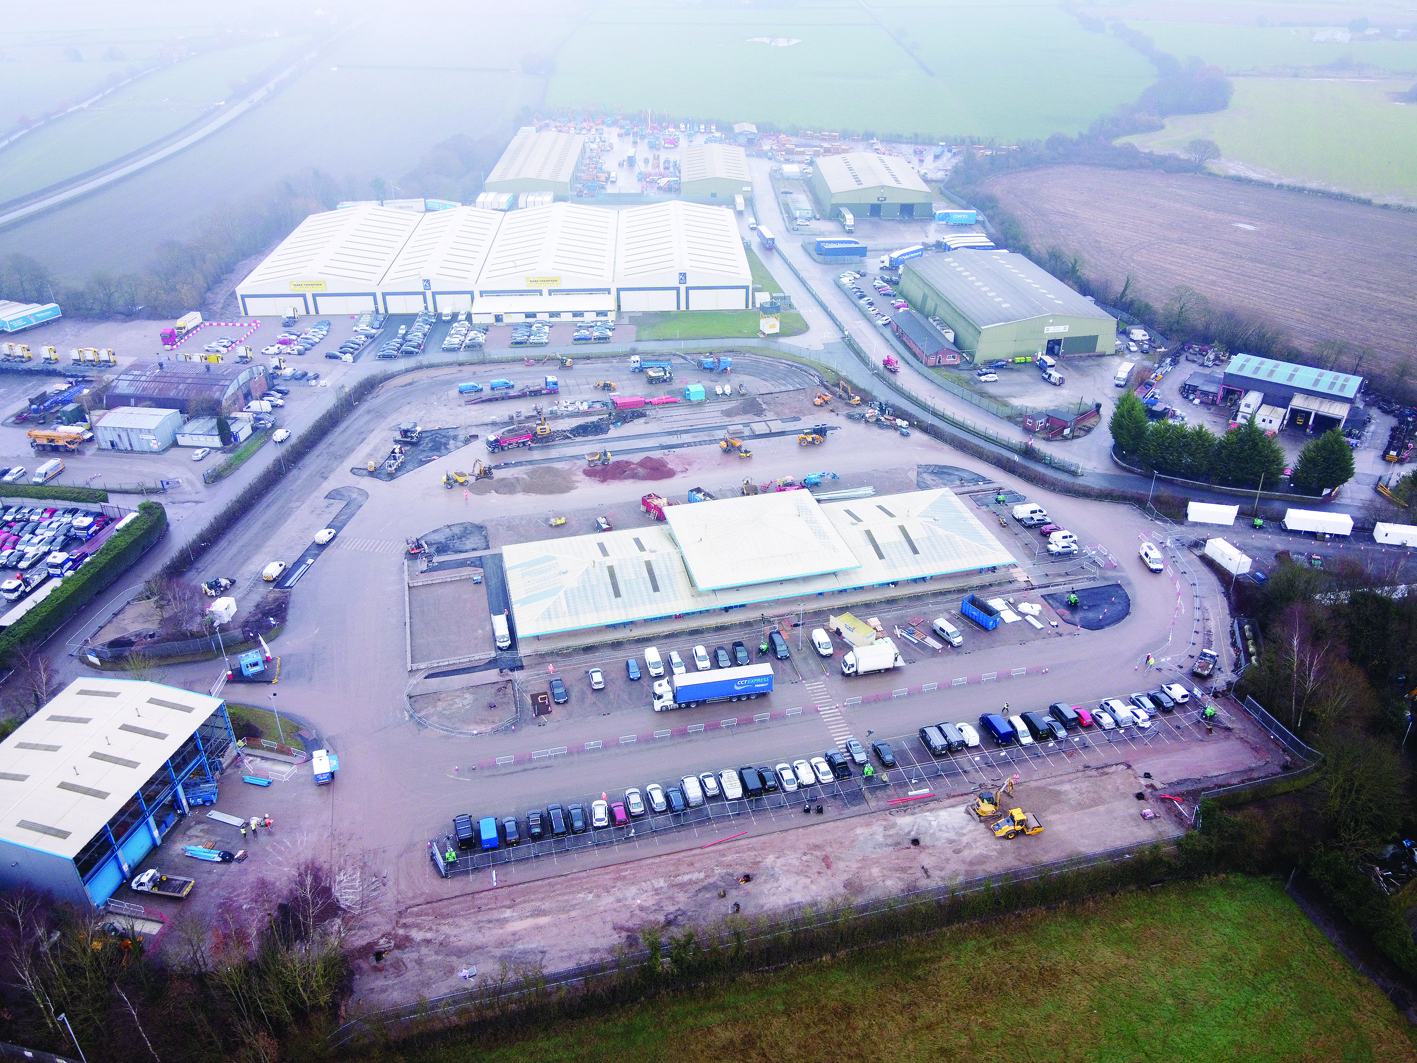 An aerial view shows the former Shearings coach holidays hub that is now being turned into a lorry park in Appleton Thorn near Warrington in north west England on December 7, 2020. - The site is at the junction of the M6 and the M56 on the route to the port of Holyhead in north Wales. The site is being adapted to handle overflow HGV traffic in advance of possible disruption at northern ports when the Brexit withdrawl period ends on January 1, 2021, according to reports. (Photo by Paul ELLIS / AFP)